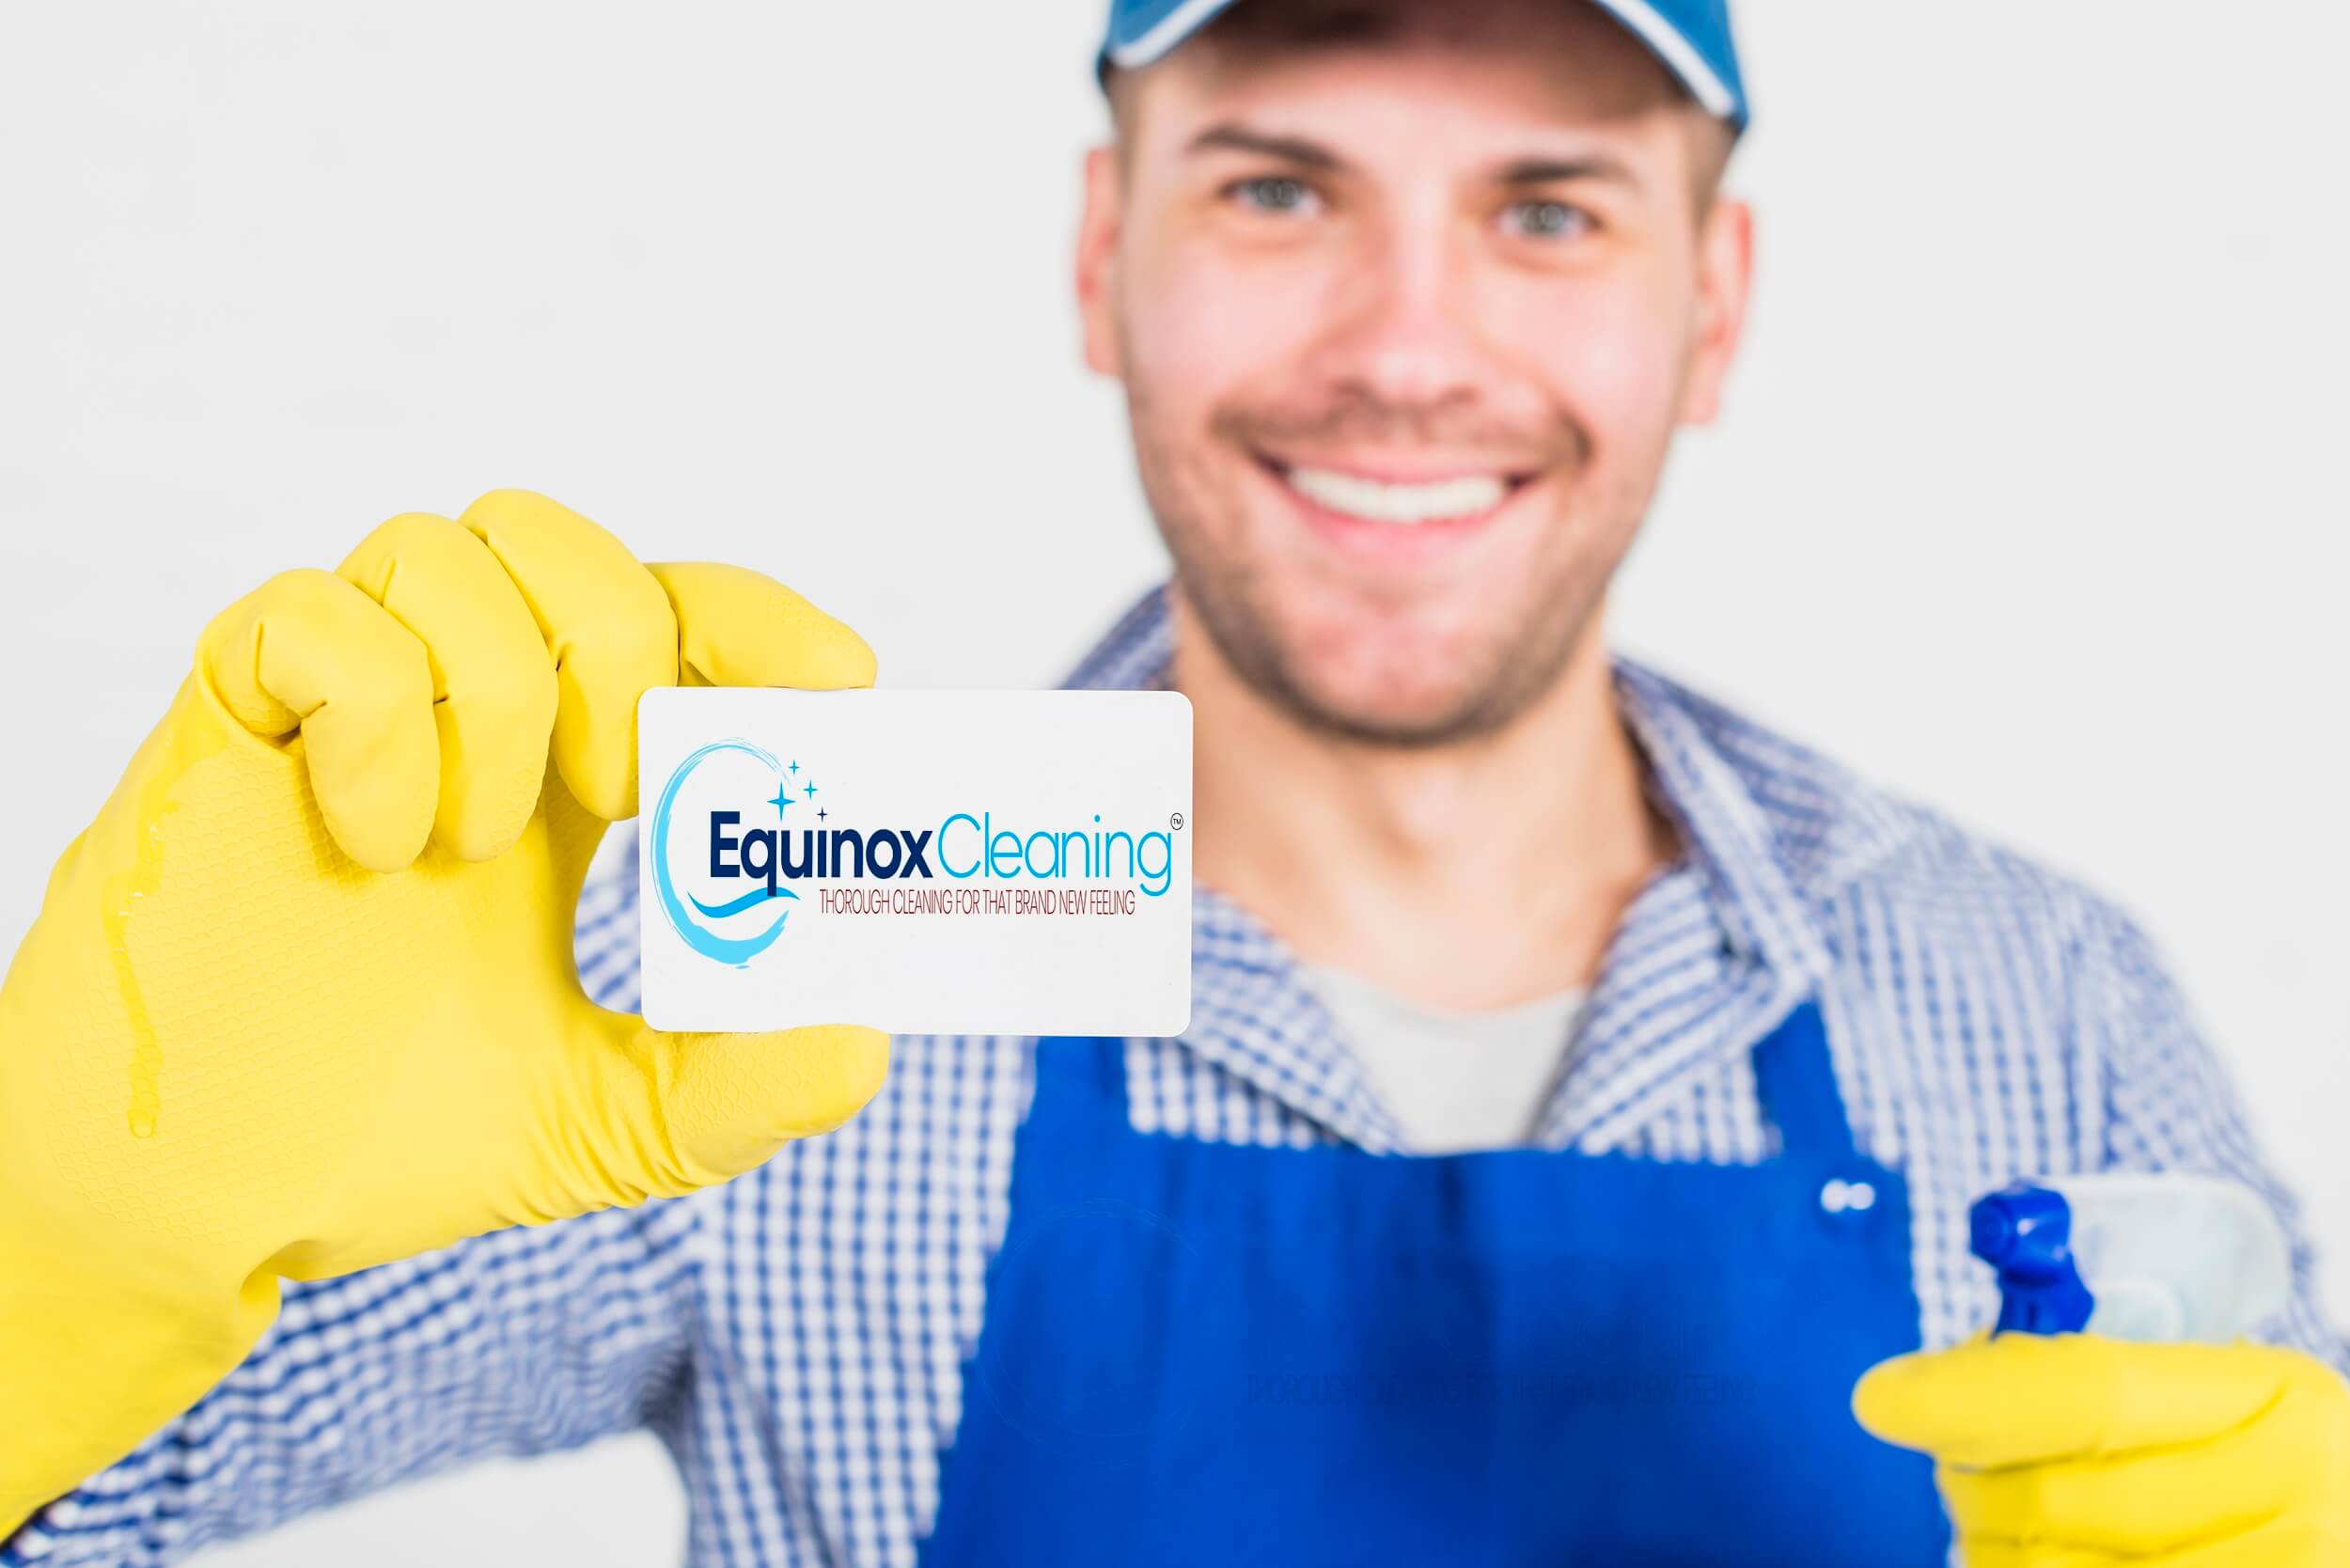 cleaning concept with man showing business card